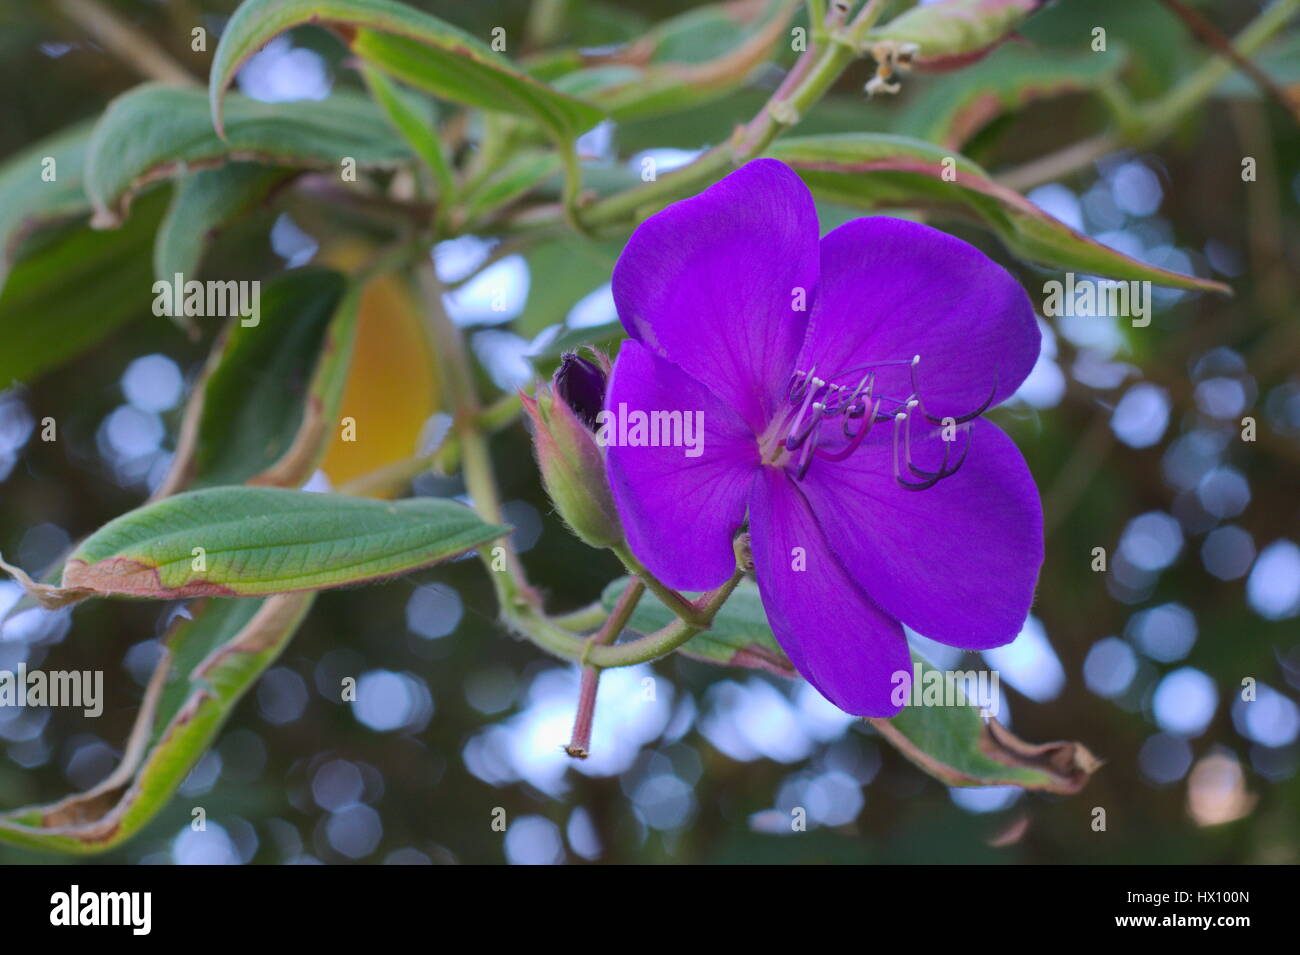 Tibouchina granulosa or purple glory bush, in flower with partly heat damaged leaves. Stock Photo